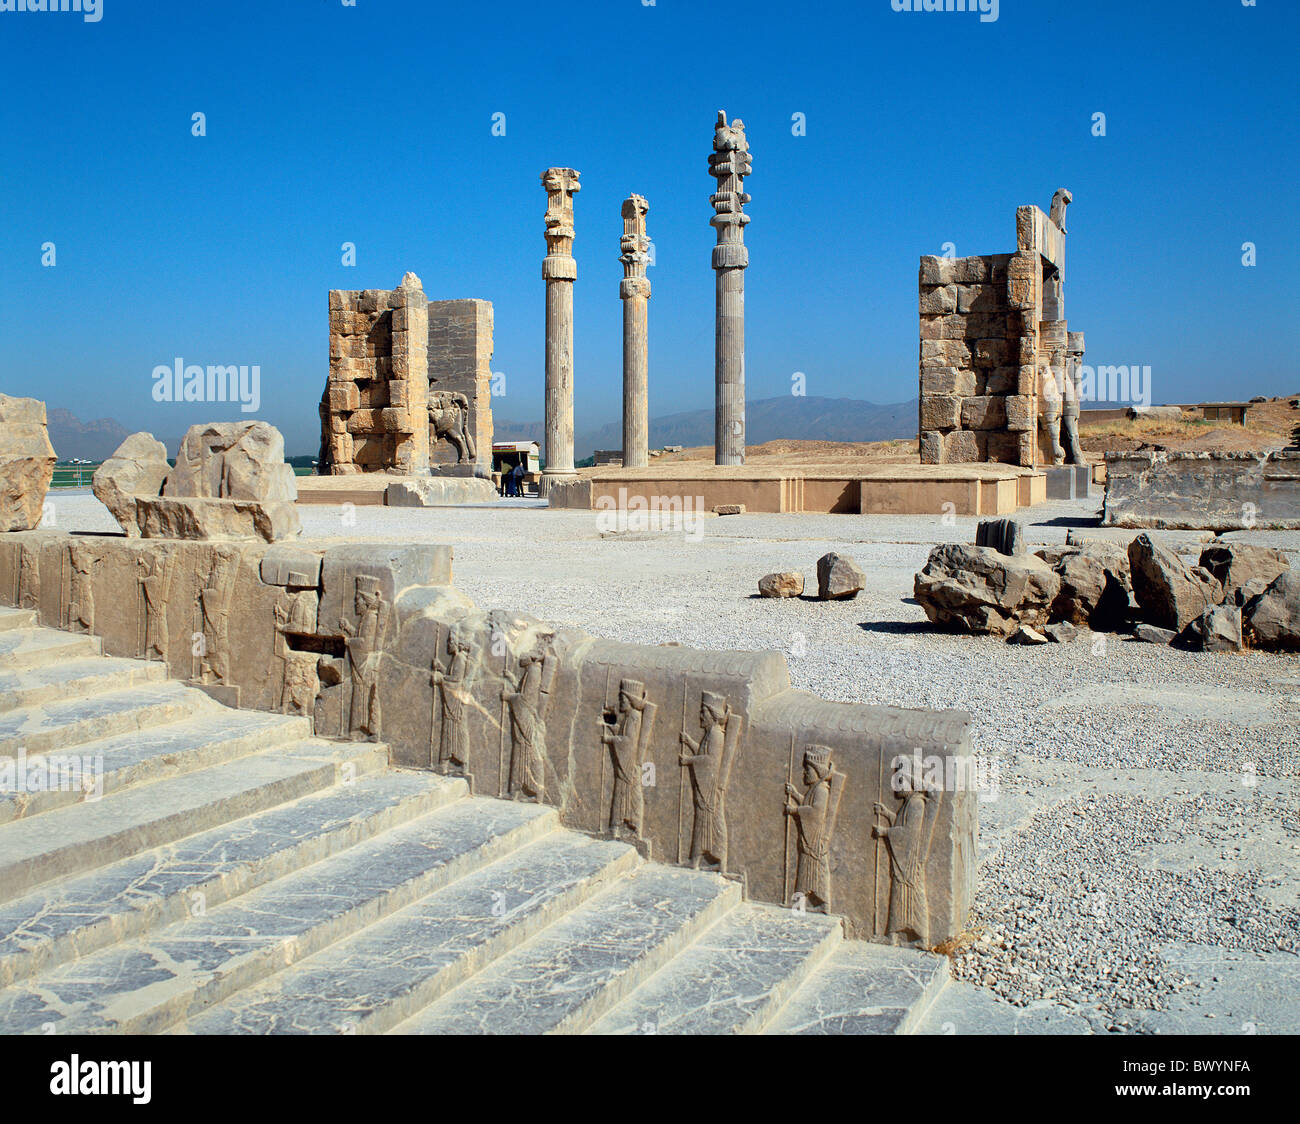 Apadana behind Xerxes gate Iran Middle East culture wall Persepolis reliefs Takht e Jamshid stair Ancient Stock Photo